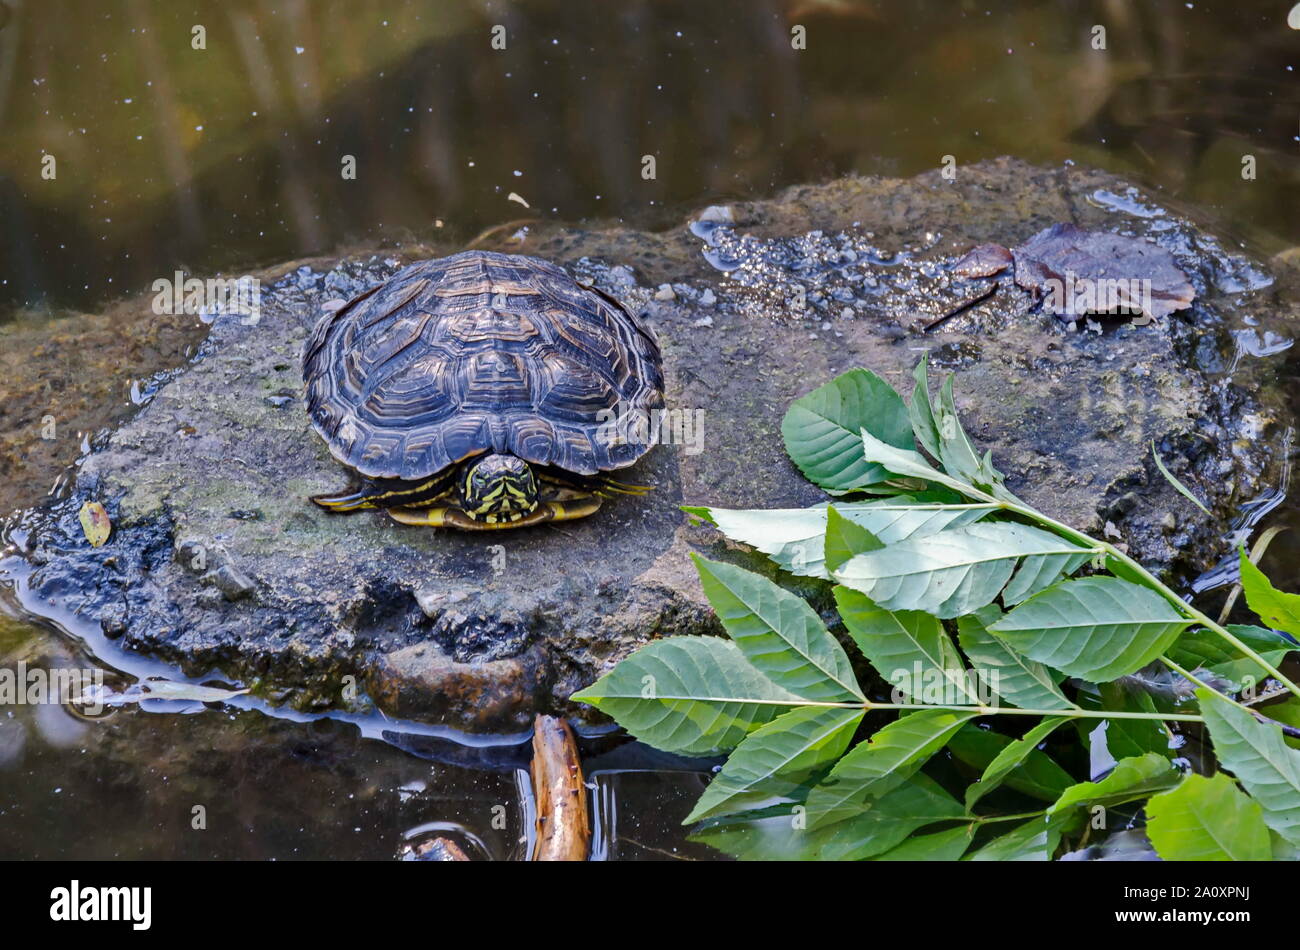 Tortoise, terrapin, turtle or Теstudinidae relax in nature environent at lake, South Park, Sofia, Bulgaria Stock Photo